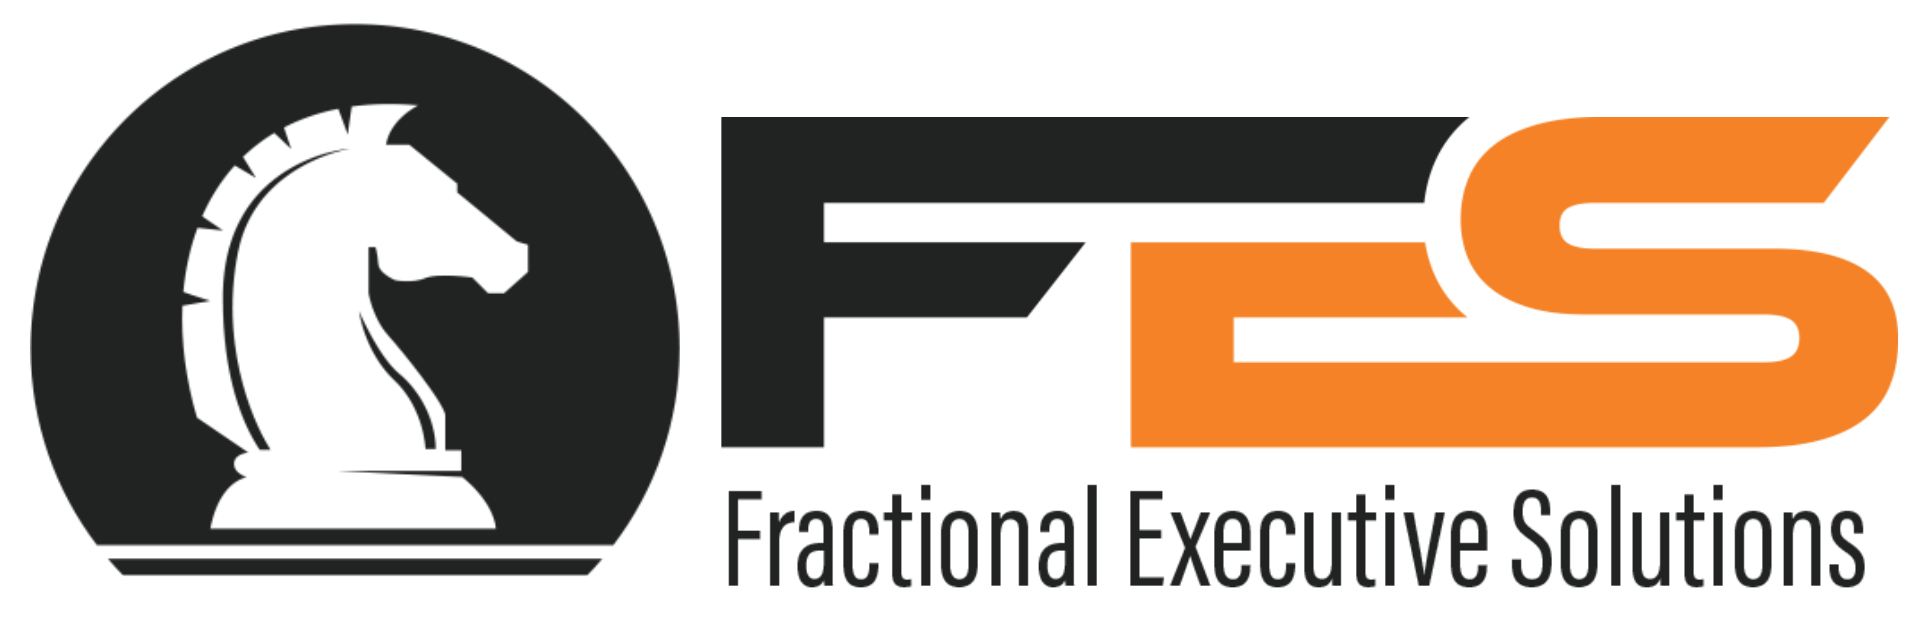 Fractional Executive Solutions